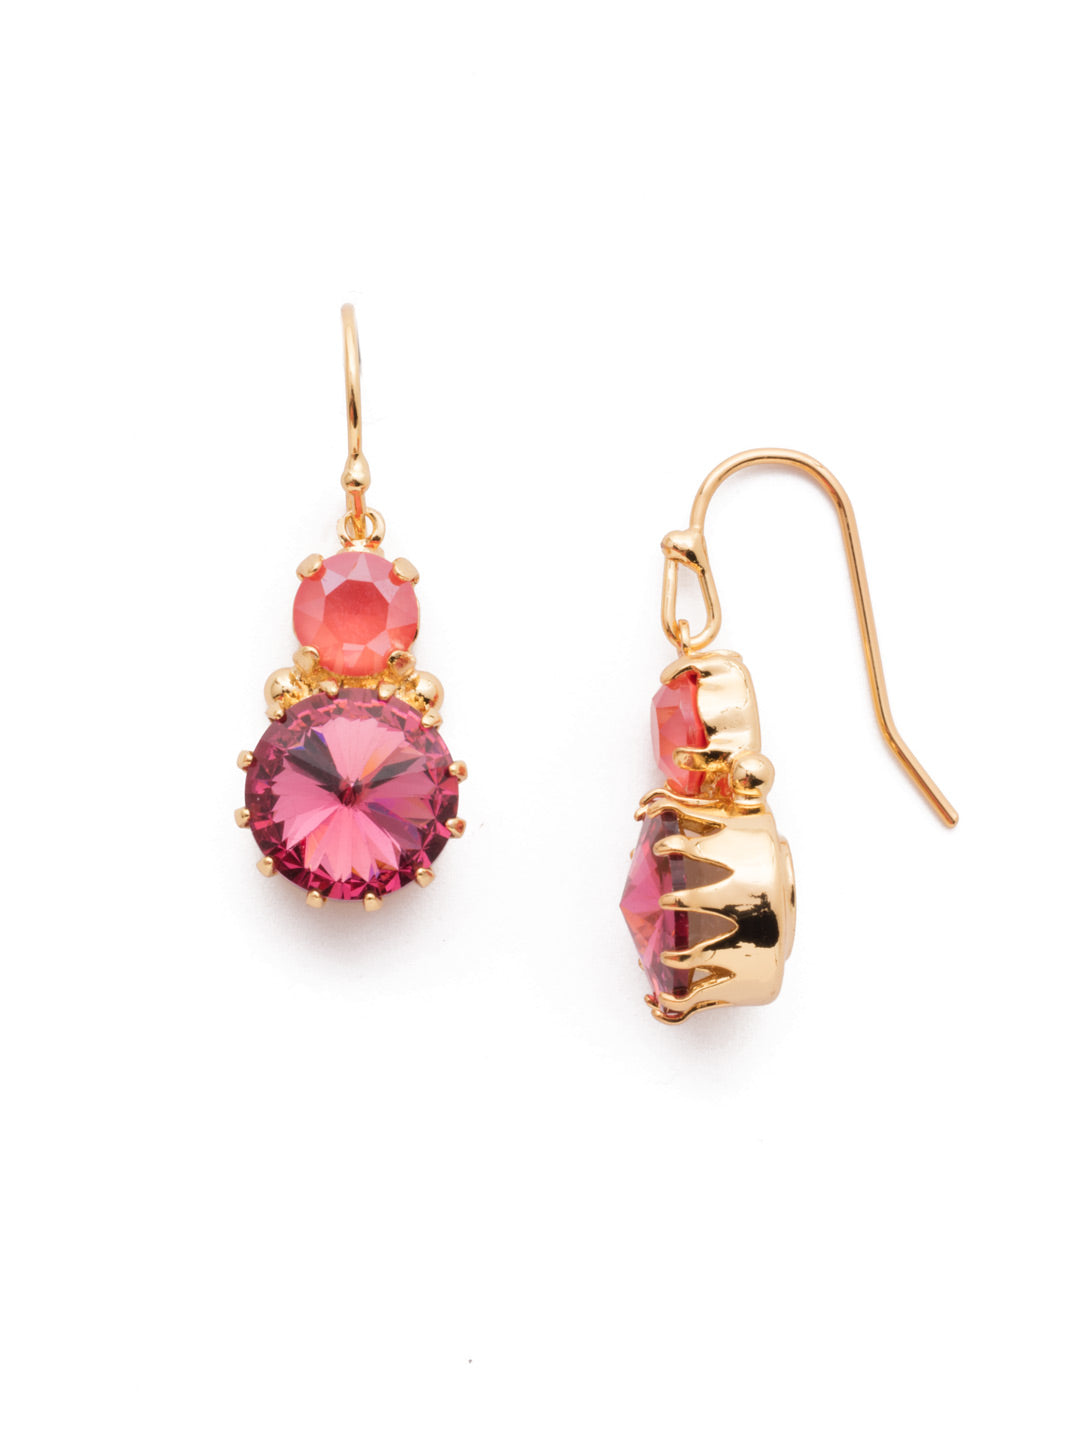 Adelina Dangle Earrings - EEA9BGBGA - These earrings make the perfect touch of sparkle to an everyday look. Featured in our Adelina earrings are are round crystals, accented by a smaller round crystal above. From Sorrelli's Begonia collection in our Bright Gold-tone finish.